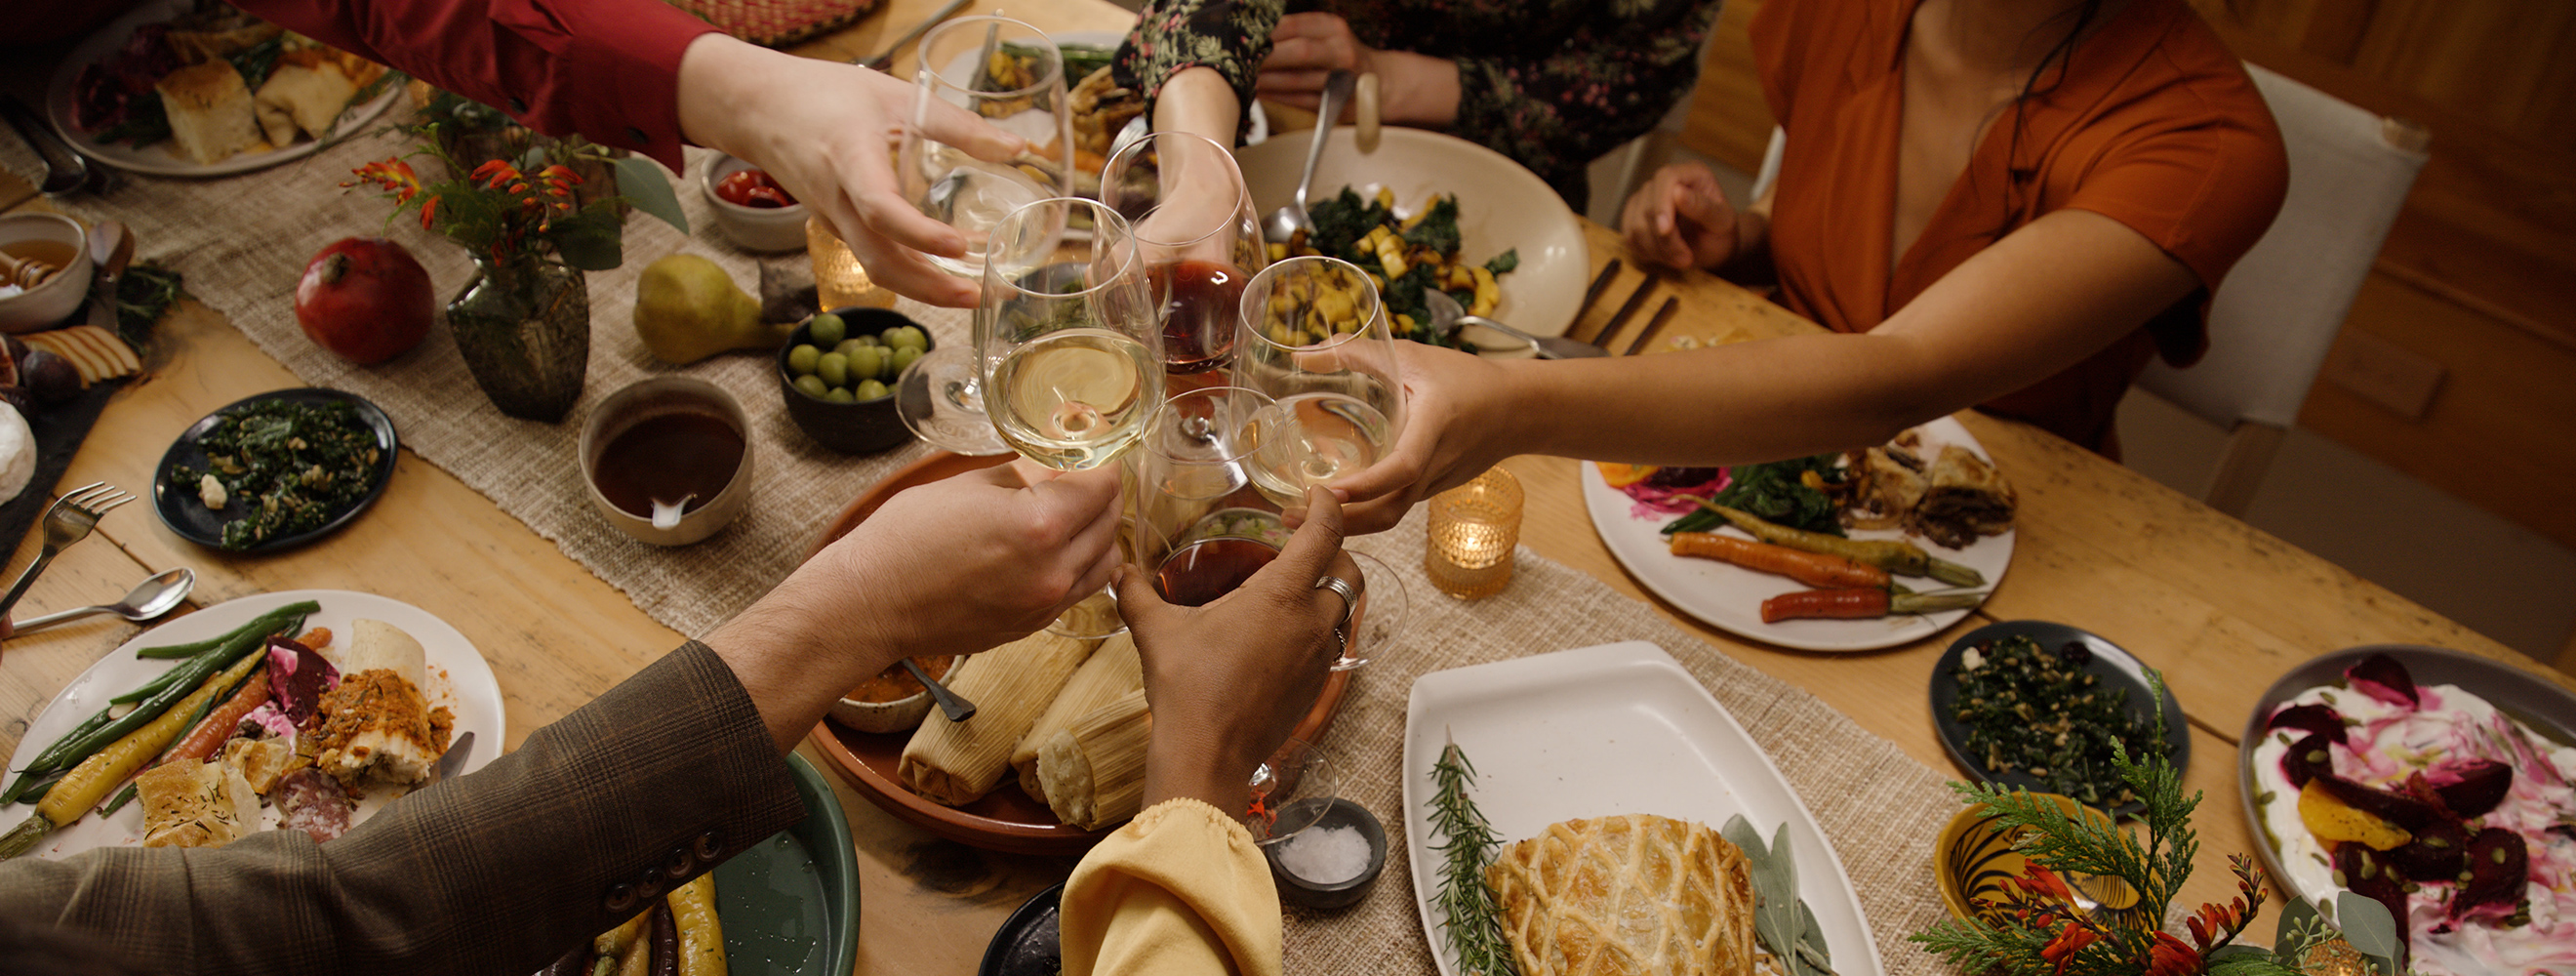 A celebratory holiday meal with friends and family sitting around a table toasting wine classed center table. 